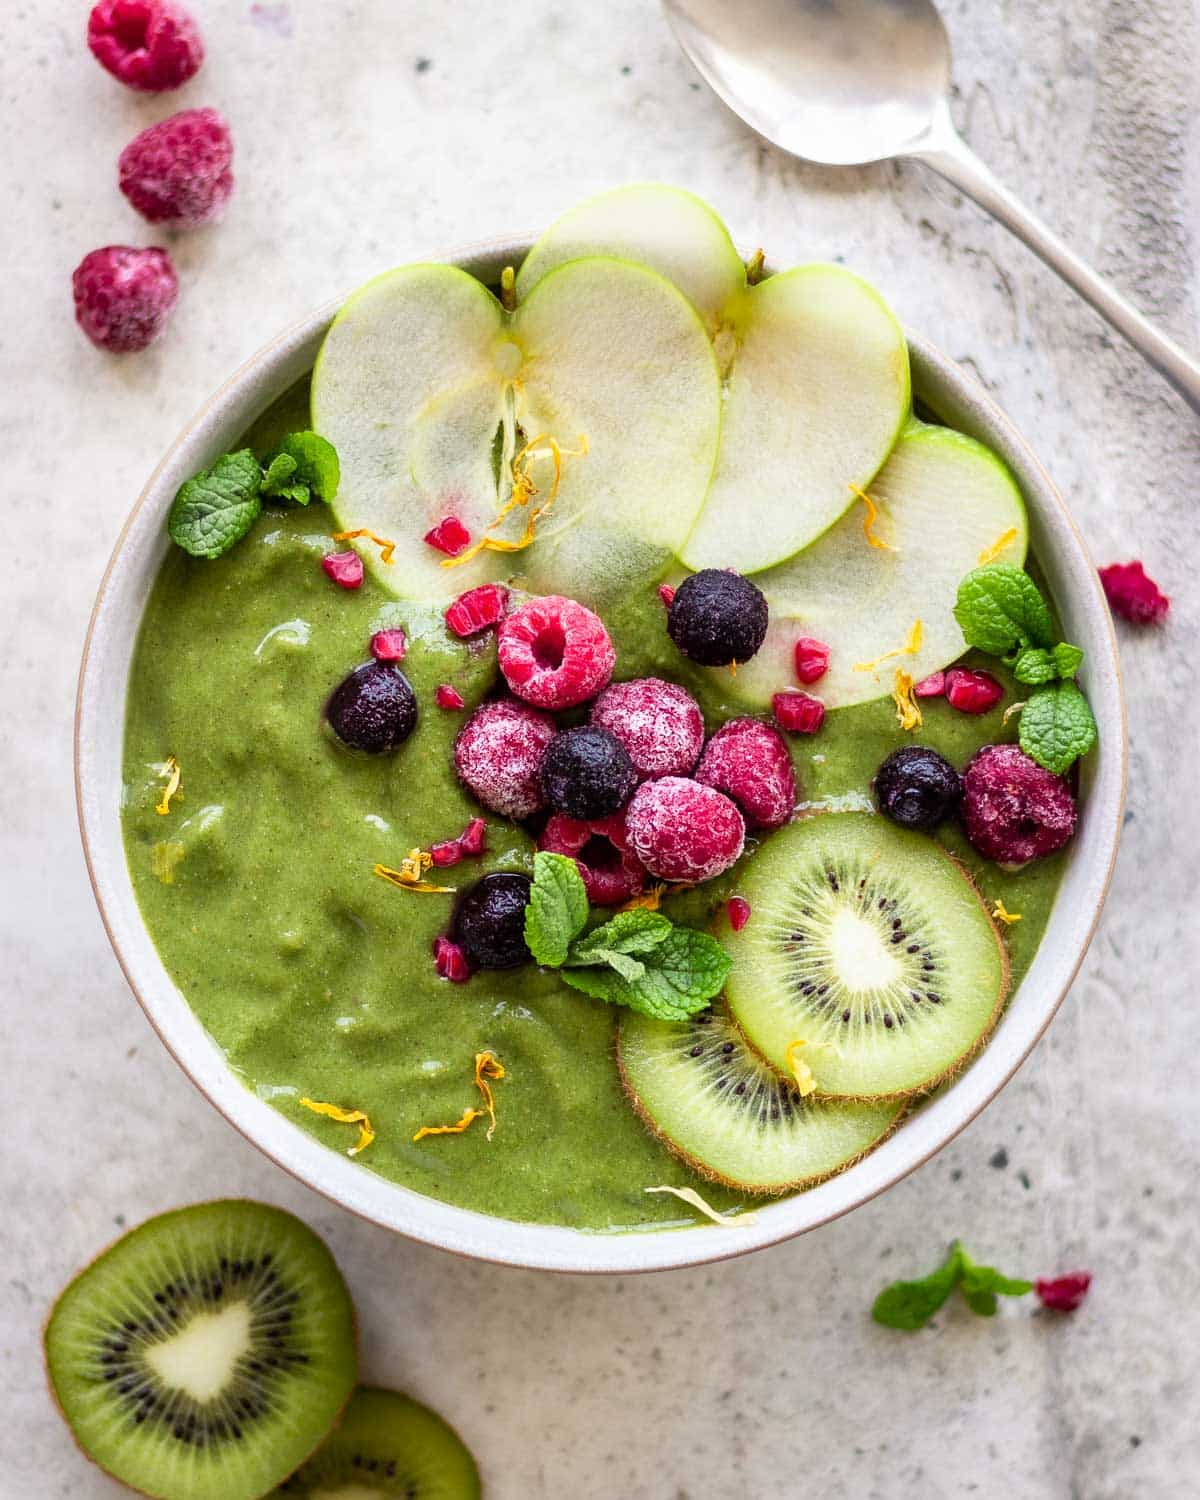 Green smoothie bowl with apple, kiwi and berries.